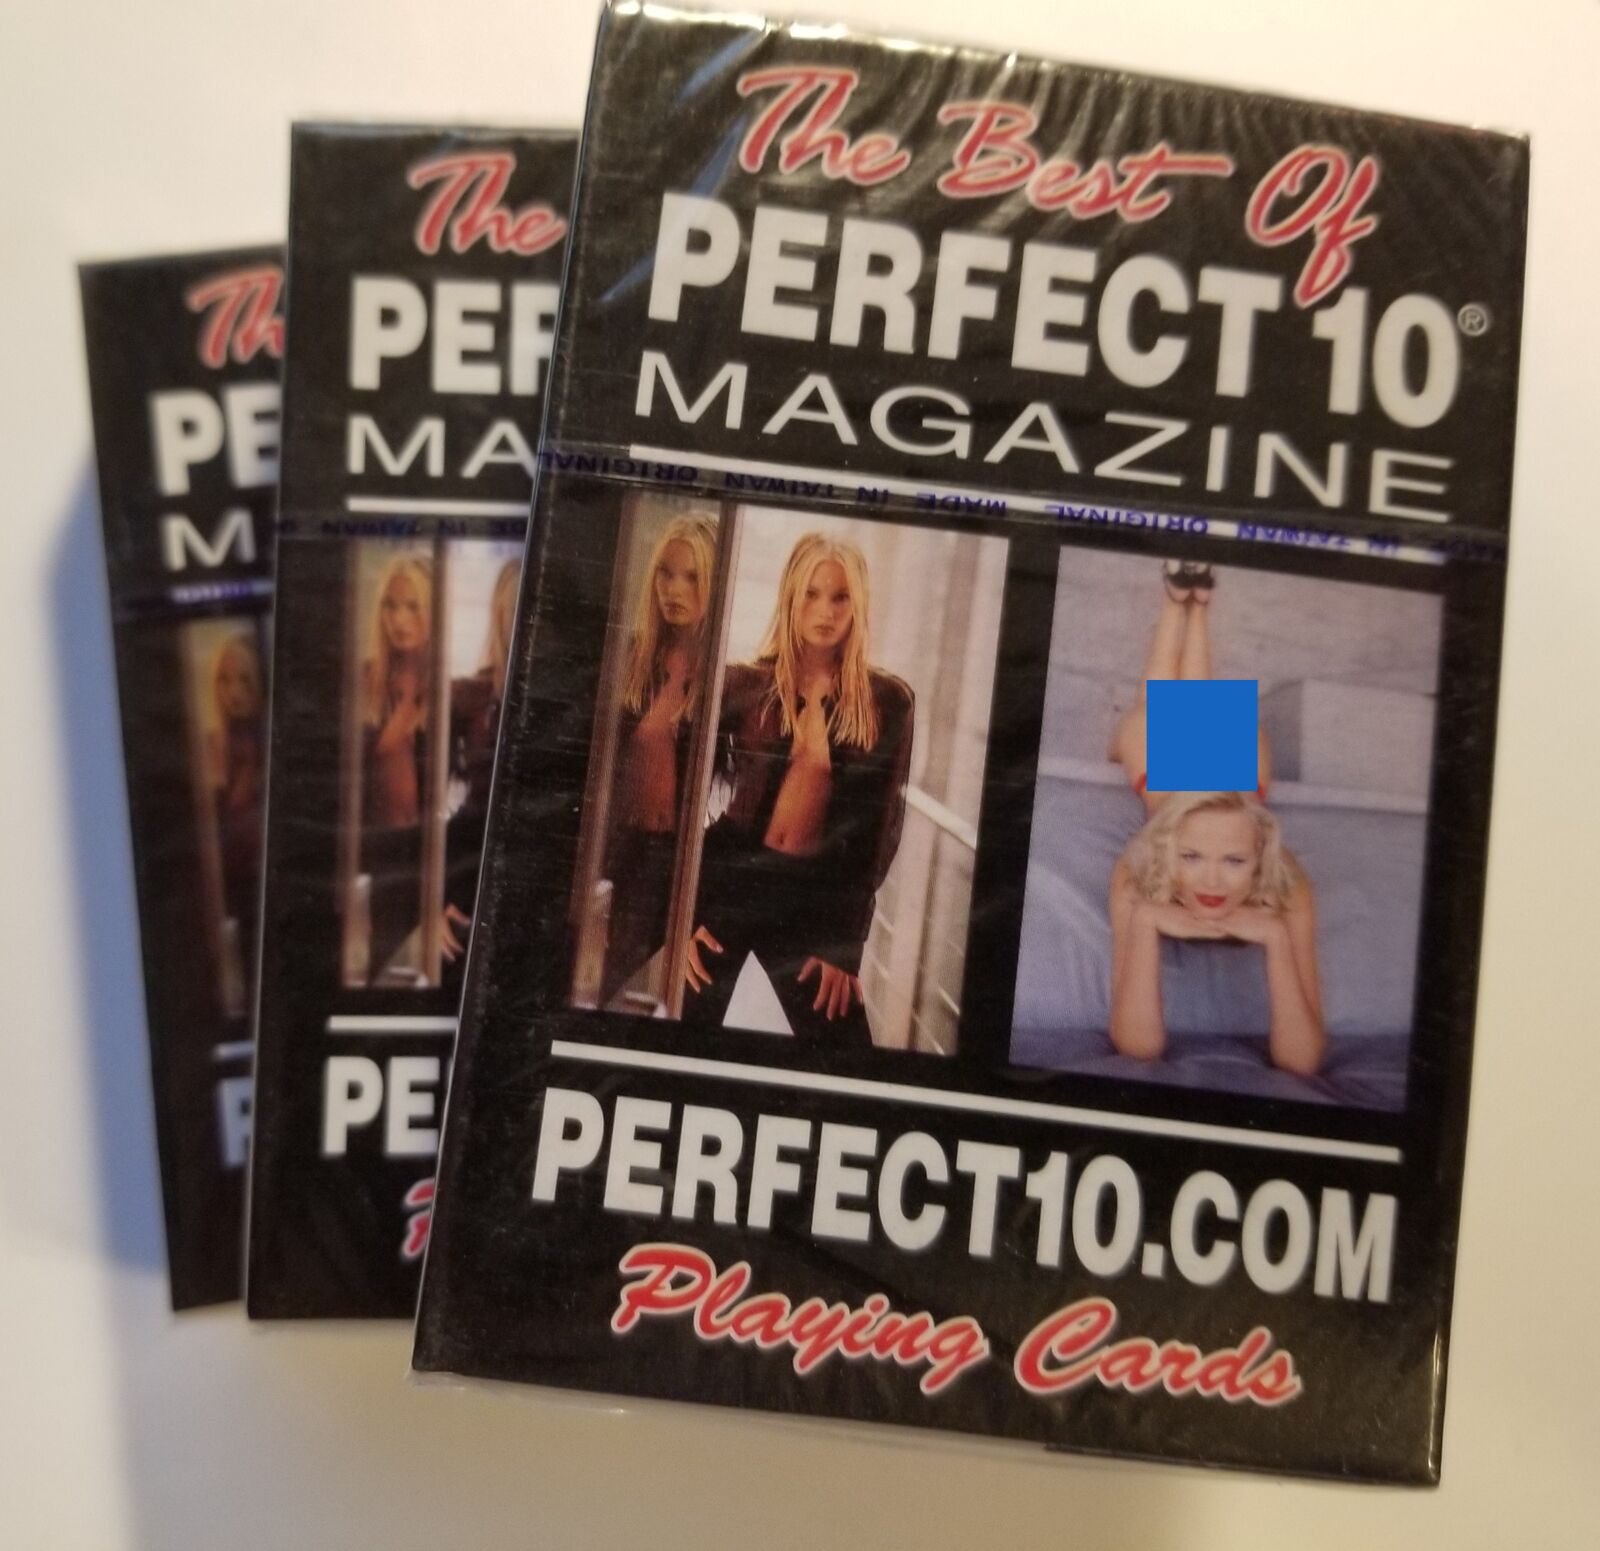 The Best of Perfect 10 Magazine, Adult Playing Cards. Sealed, 18+ only